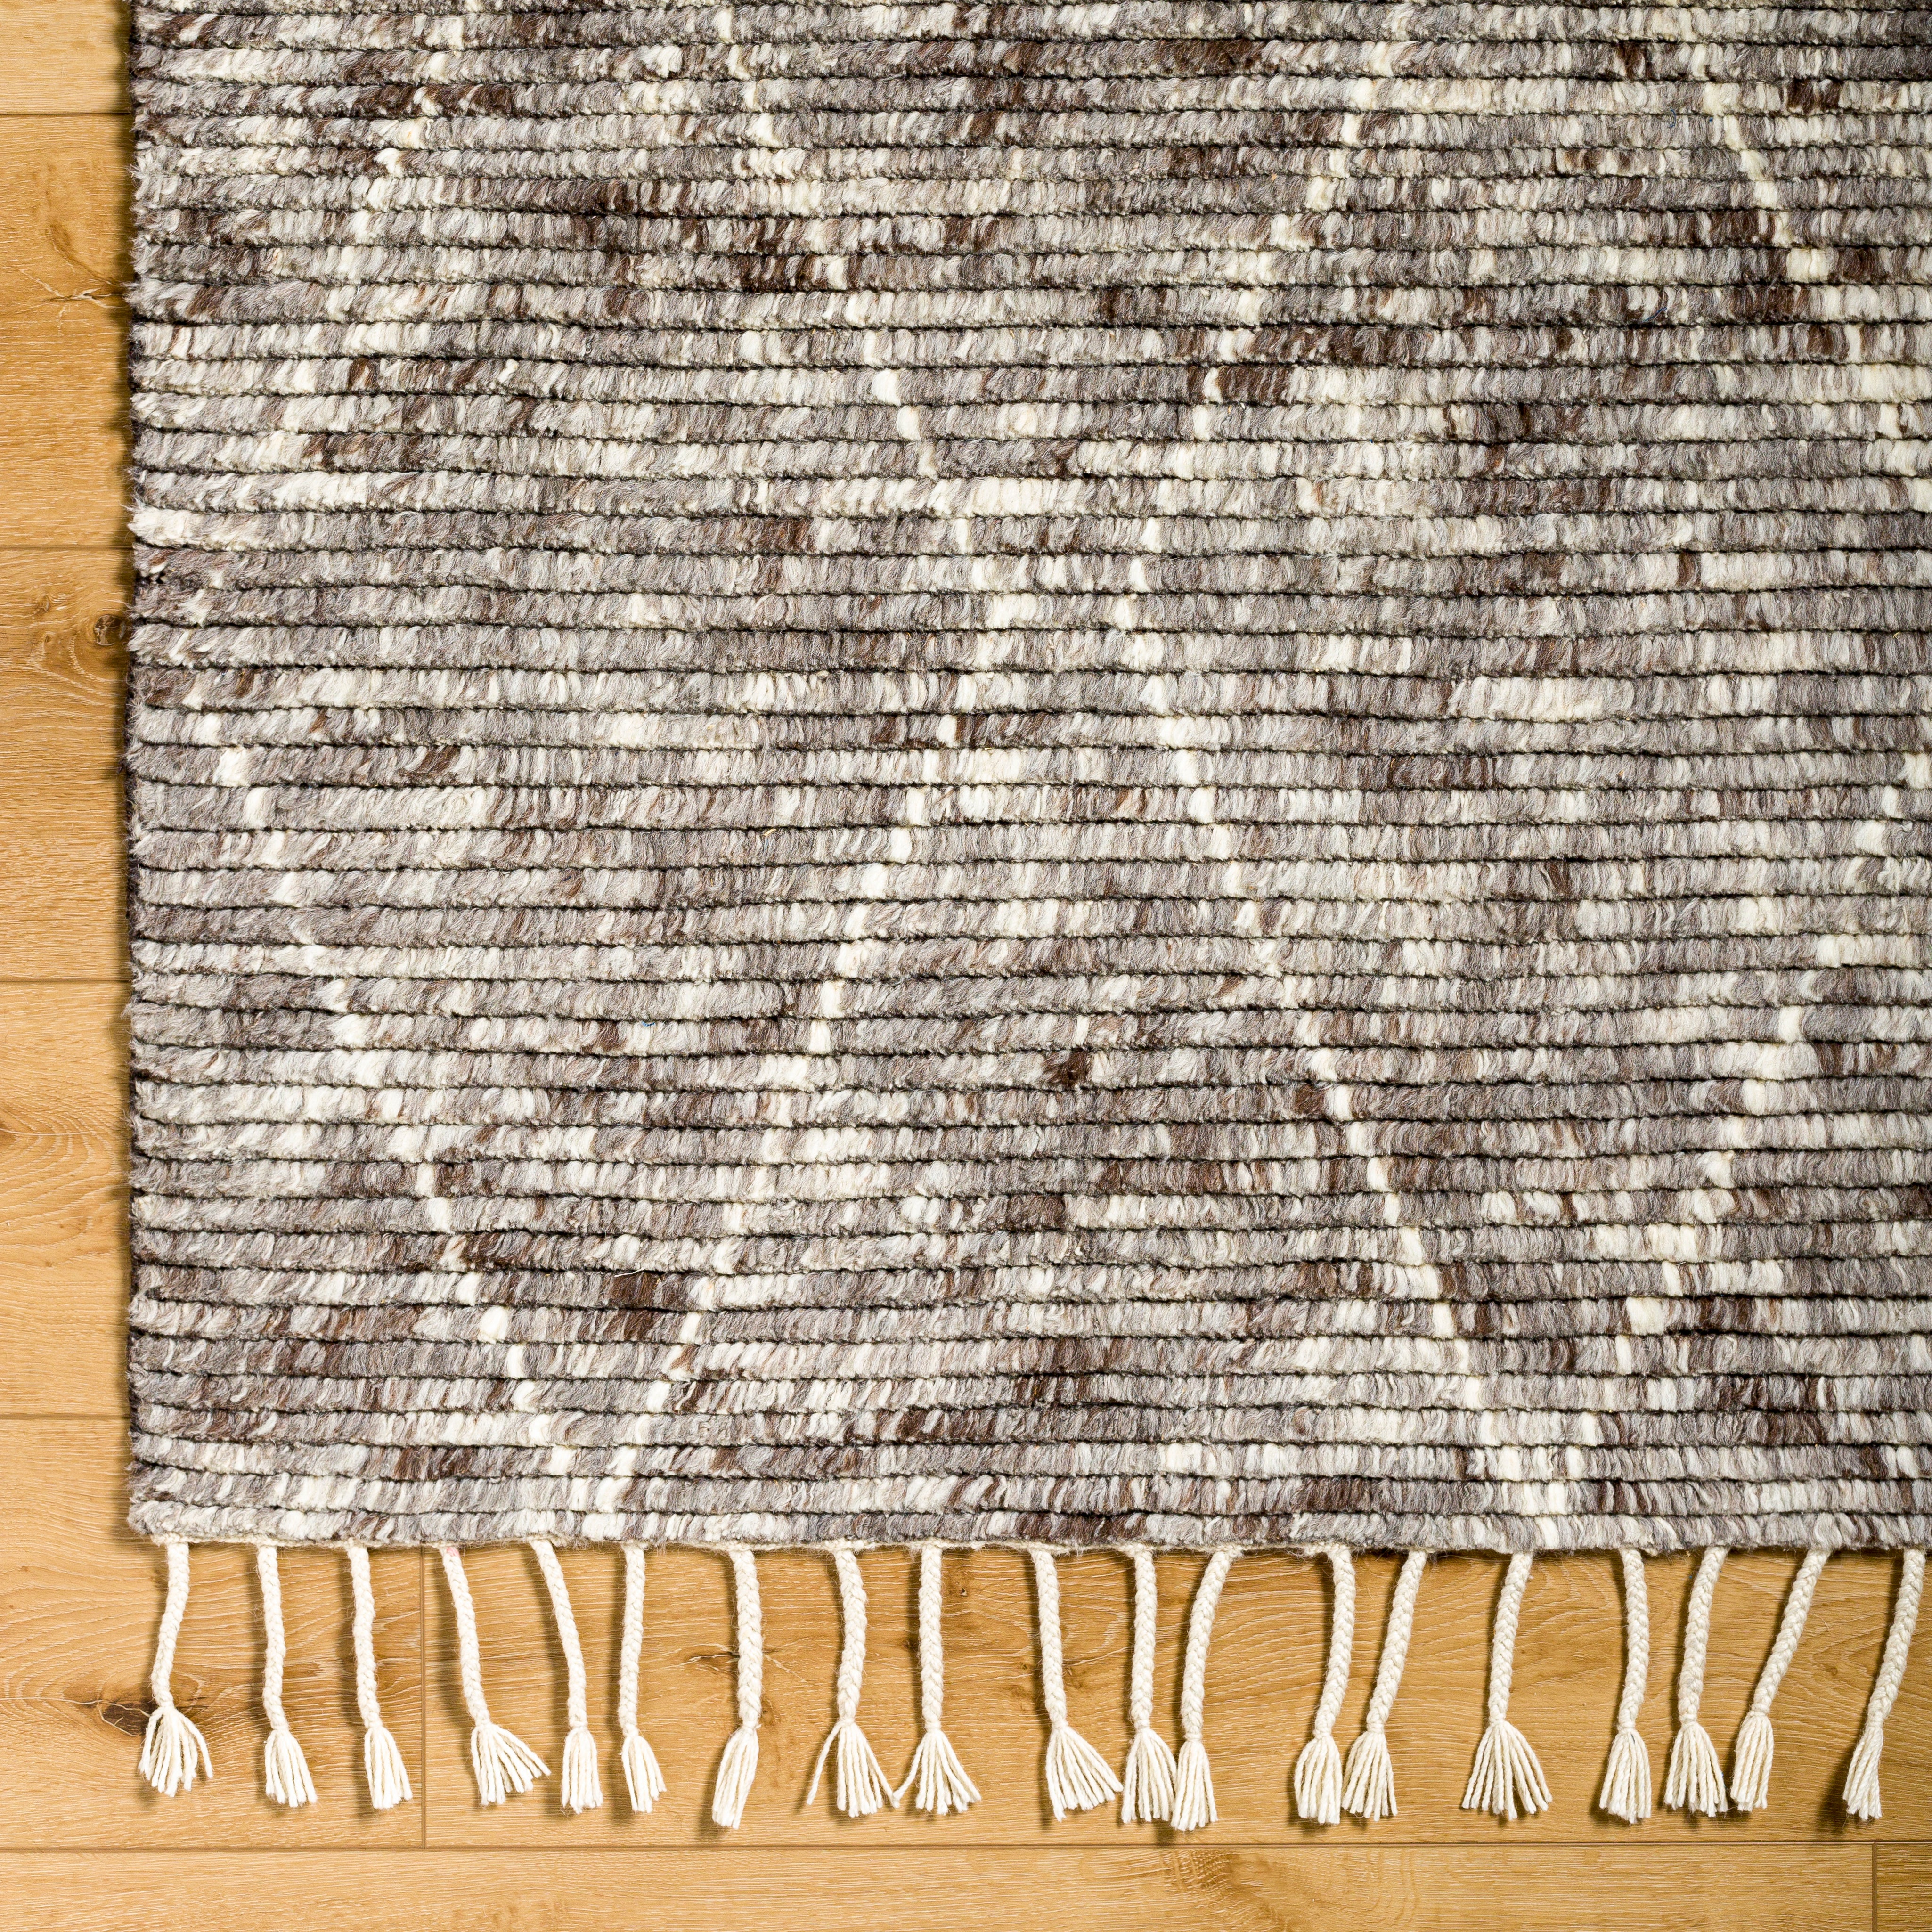 The Camille Jasper Wolf hand-knotted rug features a yummy blend of charcoal greys and chocolate brown.  Soft to the touch and made of dreamy, knotted wool in a low shed blend. Amethyst Home provides interior design, new home construction design consulting, vintage area rugs, and lighting in the Winter Garden, Florida metro area.